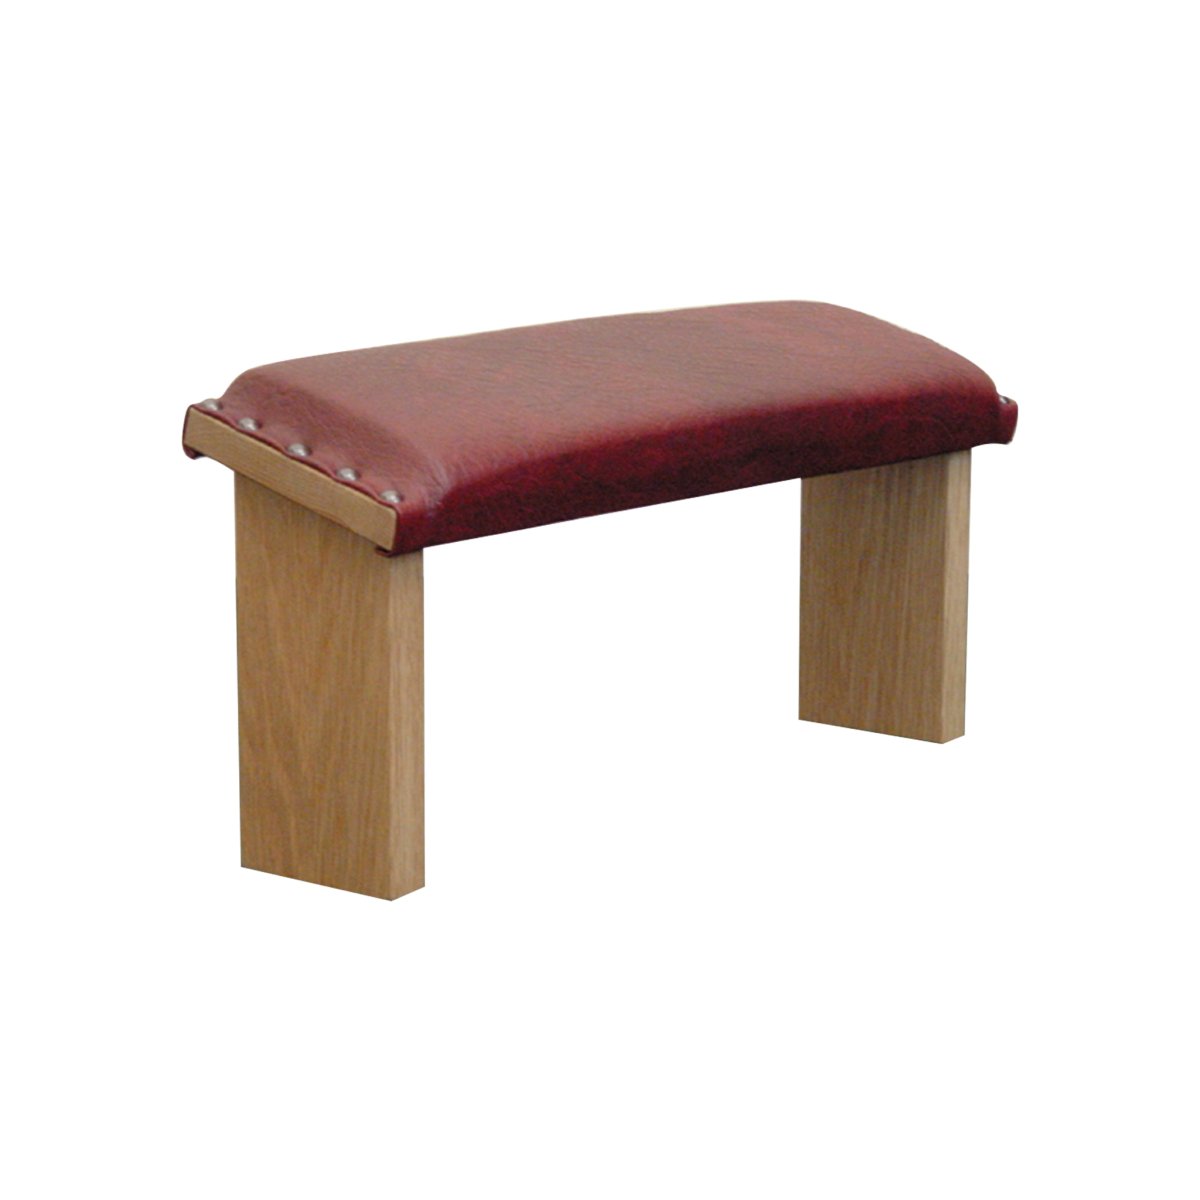 Upholstered Sanctuary Stool - Hayes & Finch